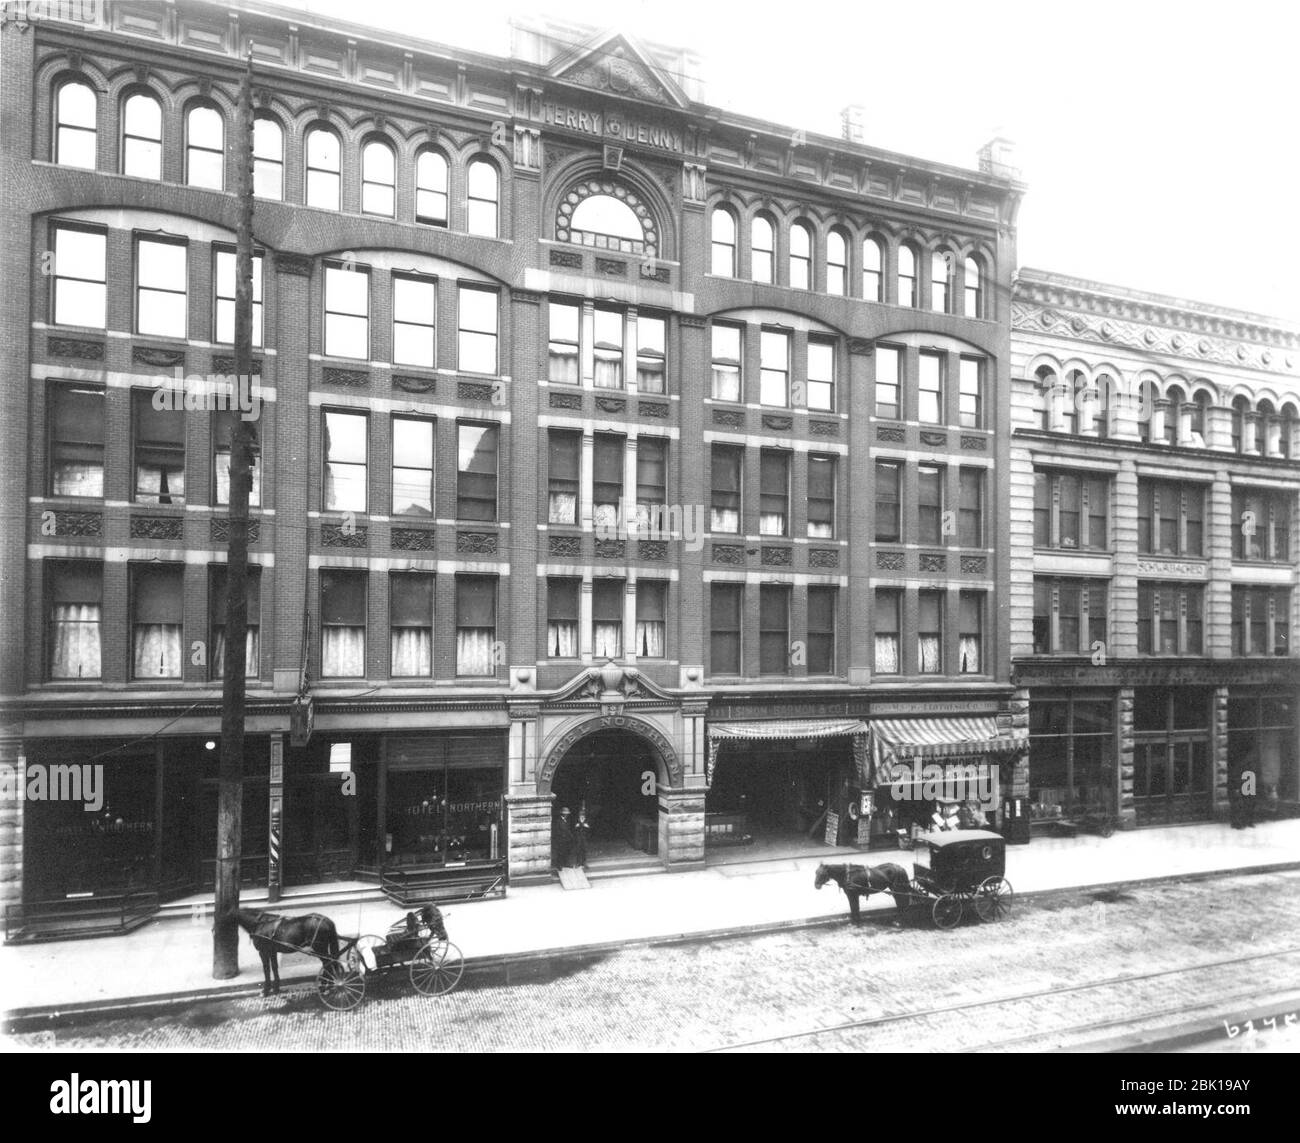 Hotel Northern, located in the Terry-Denny Building, 109-115 1st Ave S, between Yesler Way and Washington St, Seattle, ca 1905 (CURTIS 2066). Stock Photo